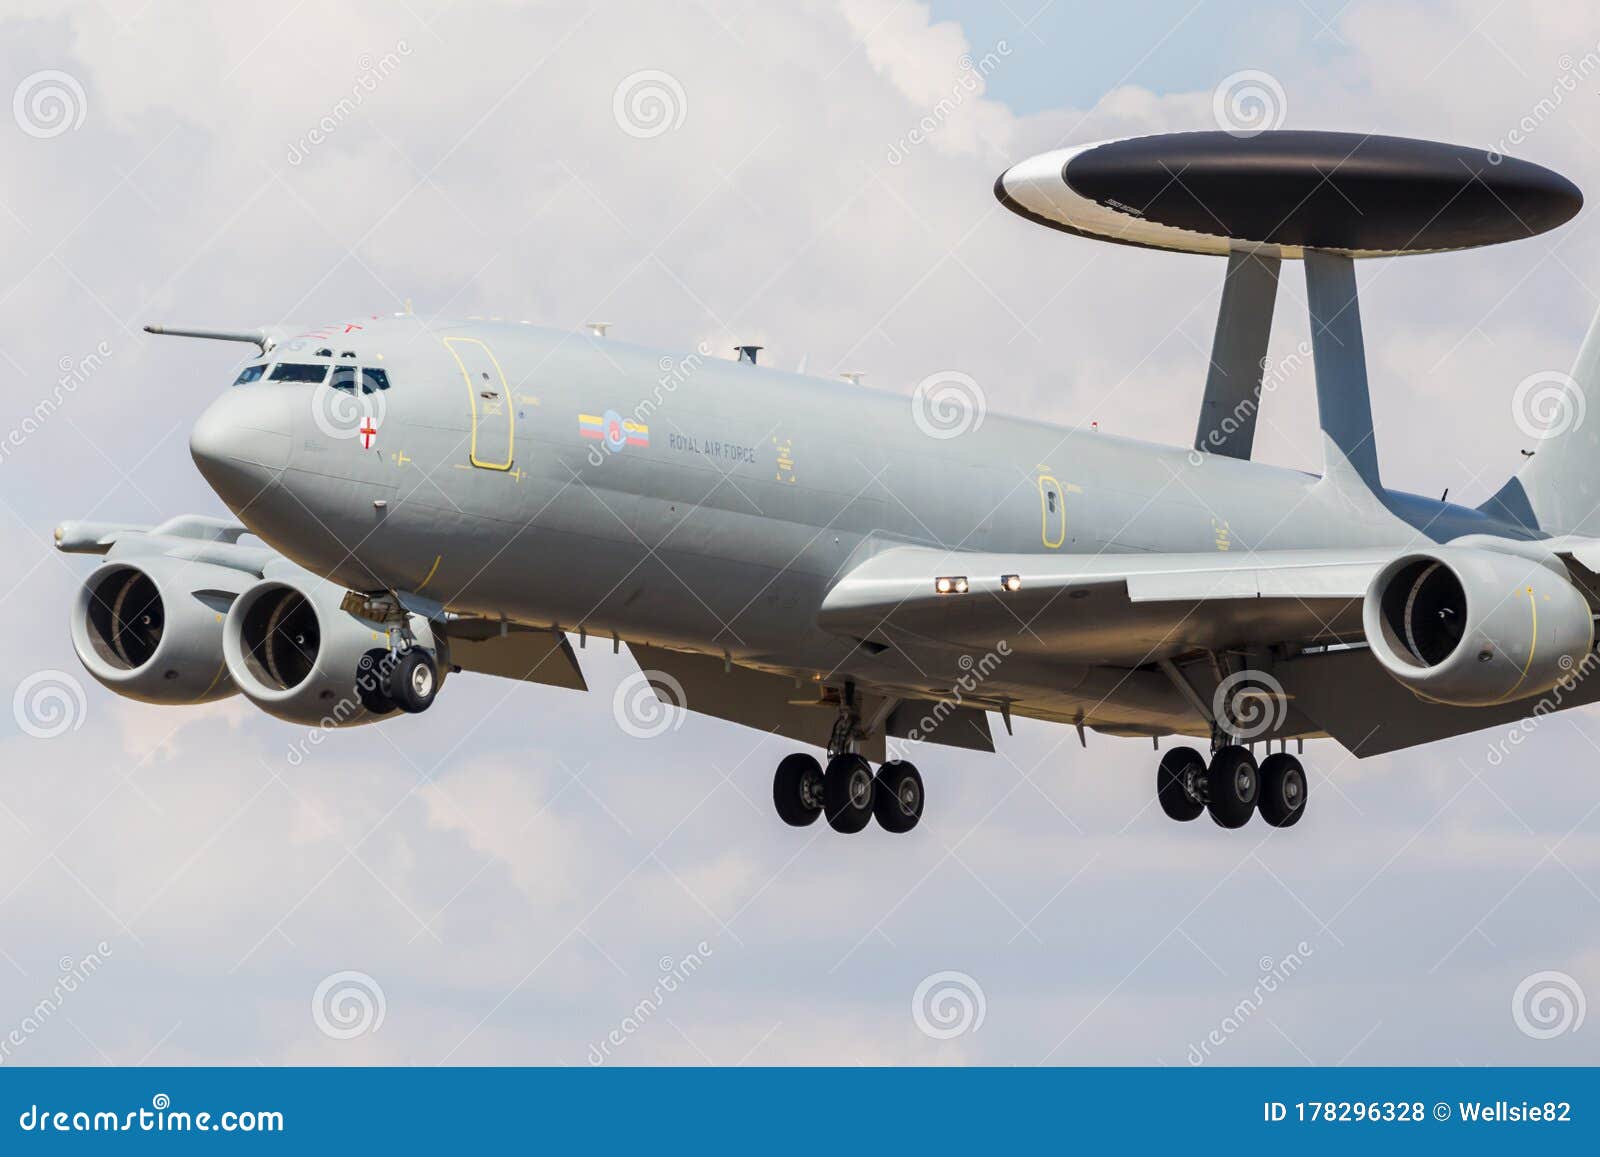 Royal Air Force E 3d Sentry Aew 1 Editorial Stock Photo Image Of Gear Sentry